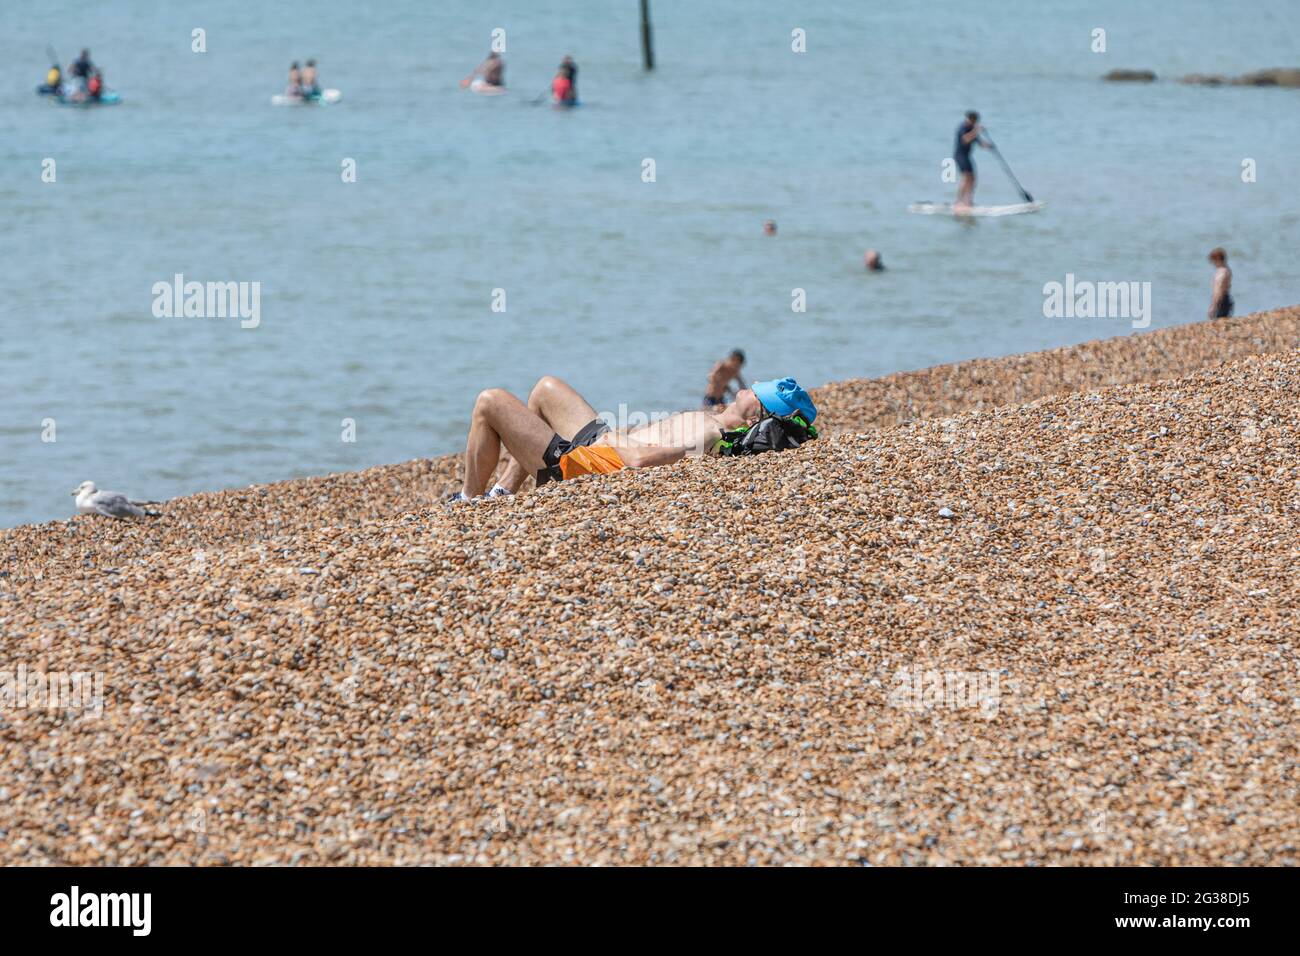 A man sunbathing on a shingle beach with people enjoyng watersports in the distance. Stock Photo